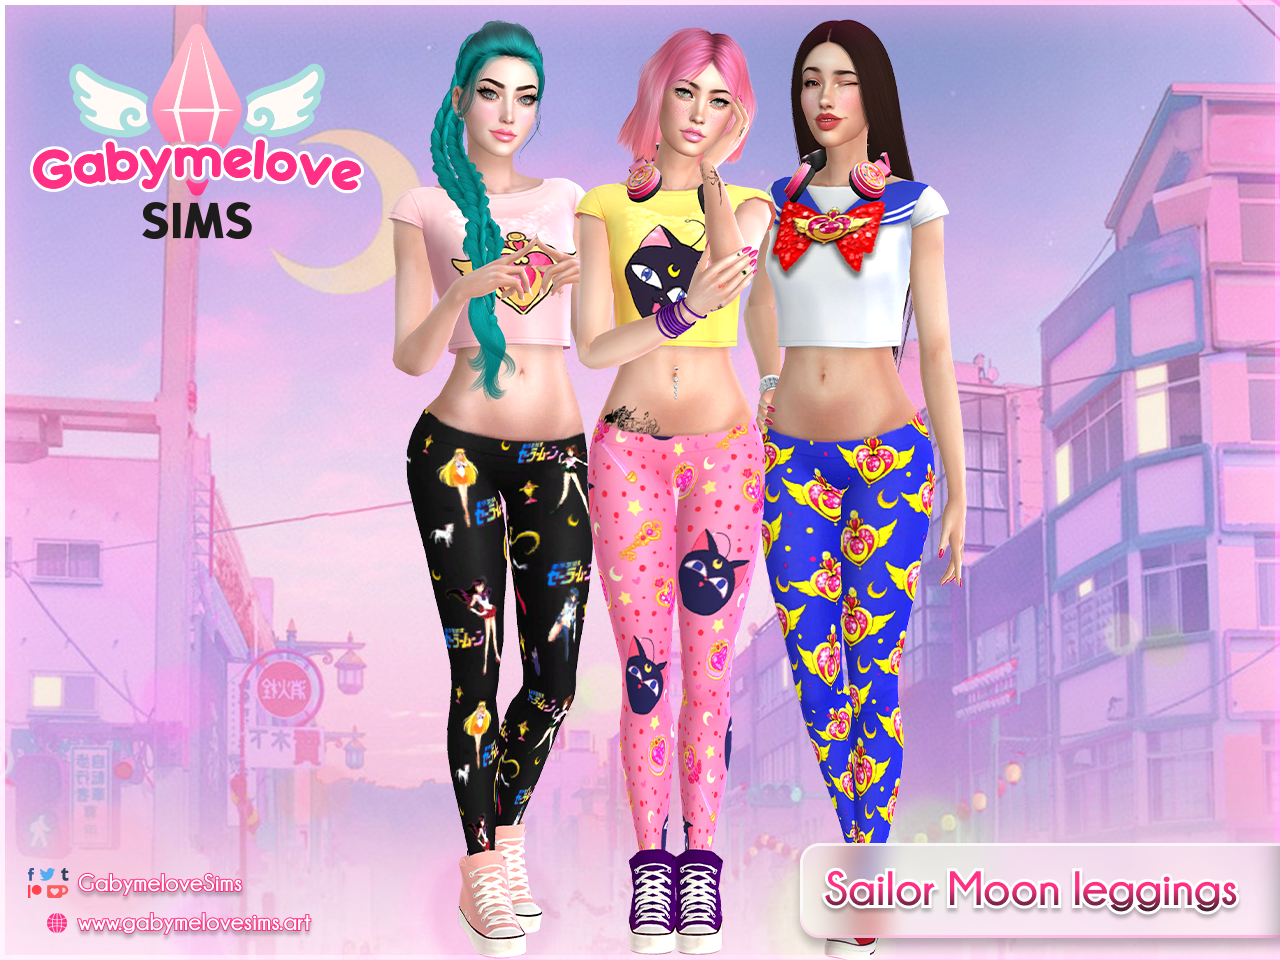 https://media.forgecdn.net/attachments/774/166/gabymelove-sims-sailor-moon-leggings-_updated.png